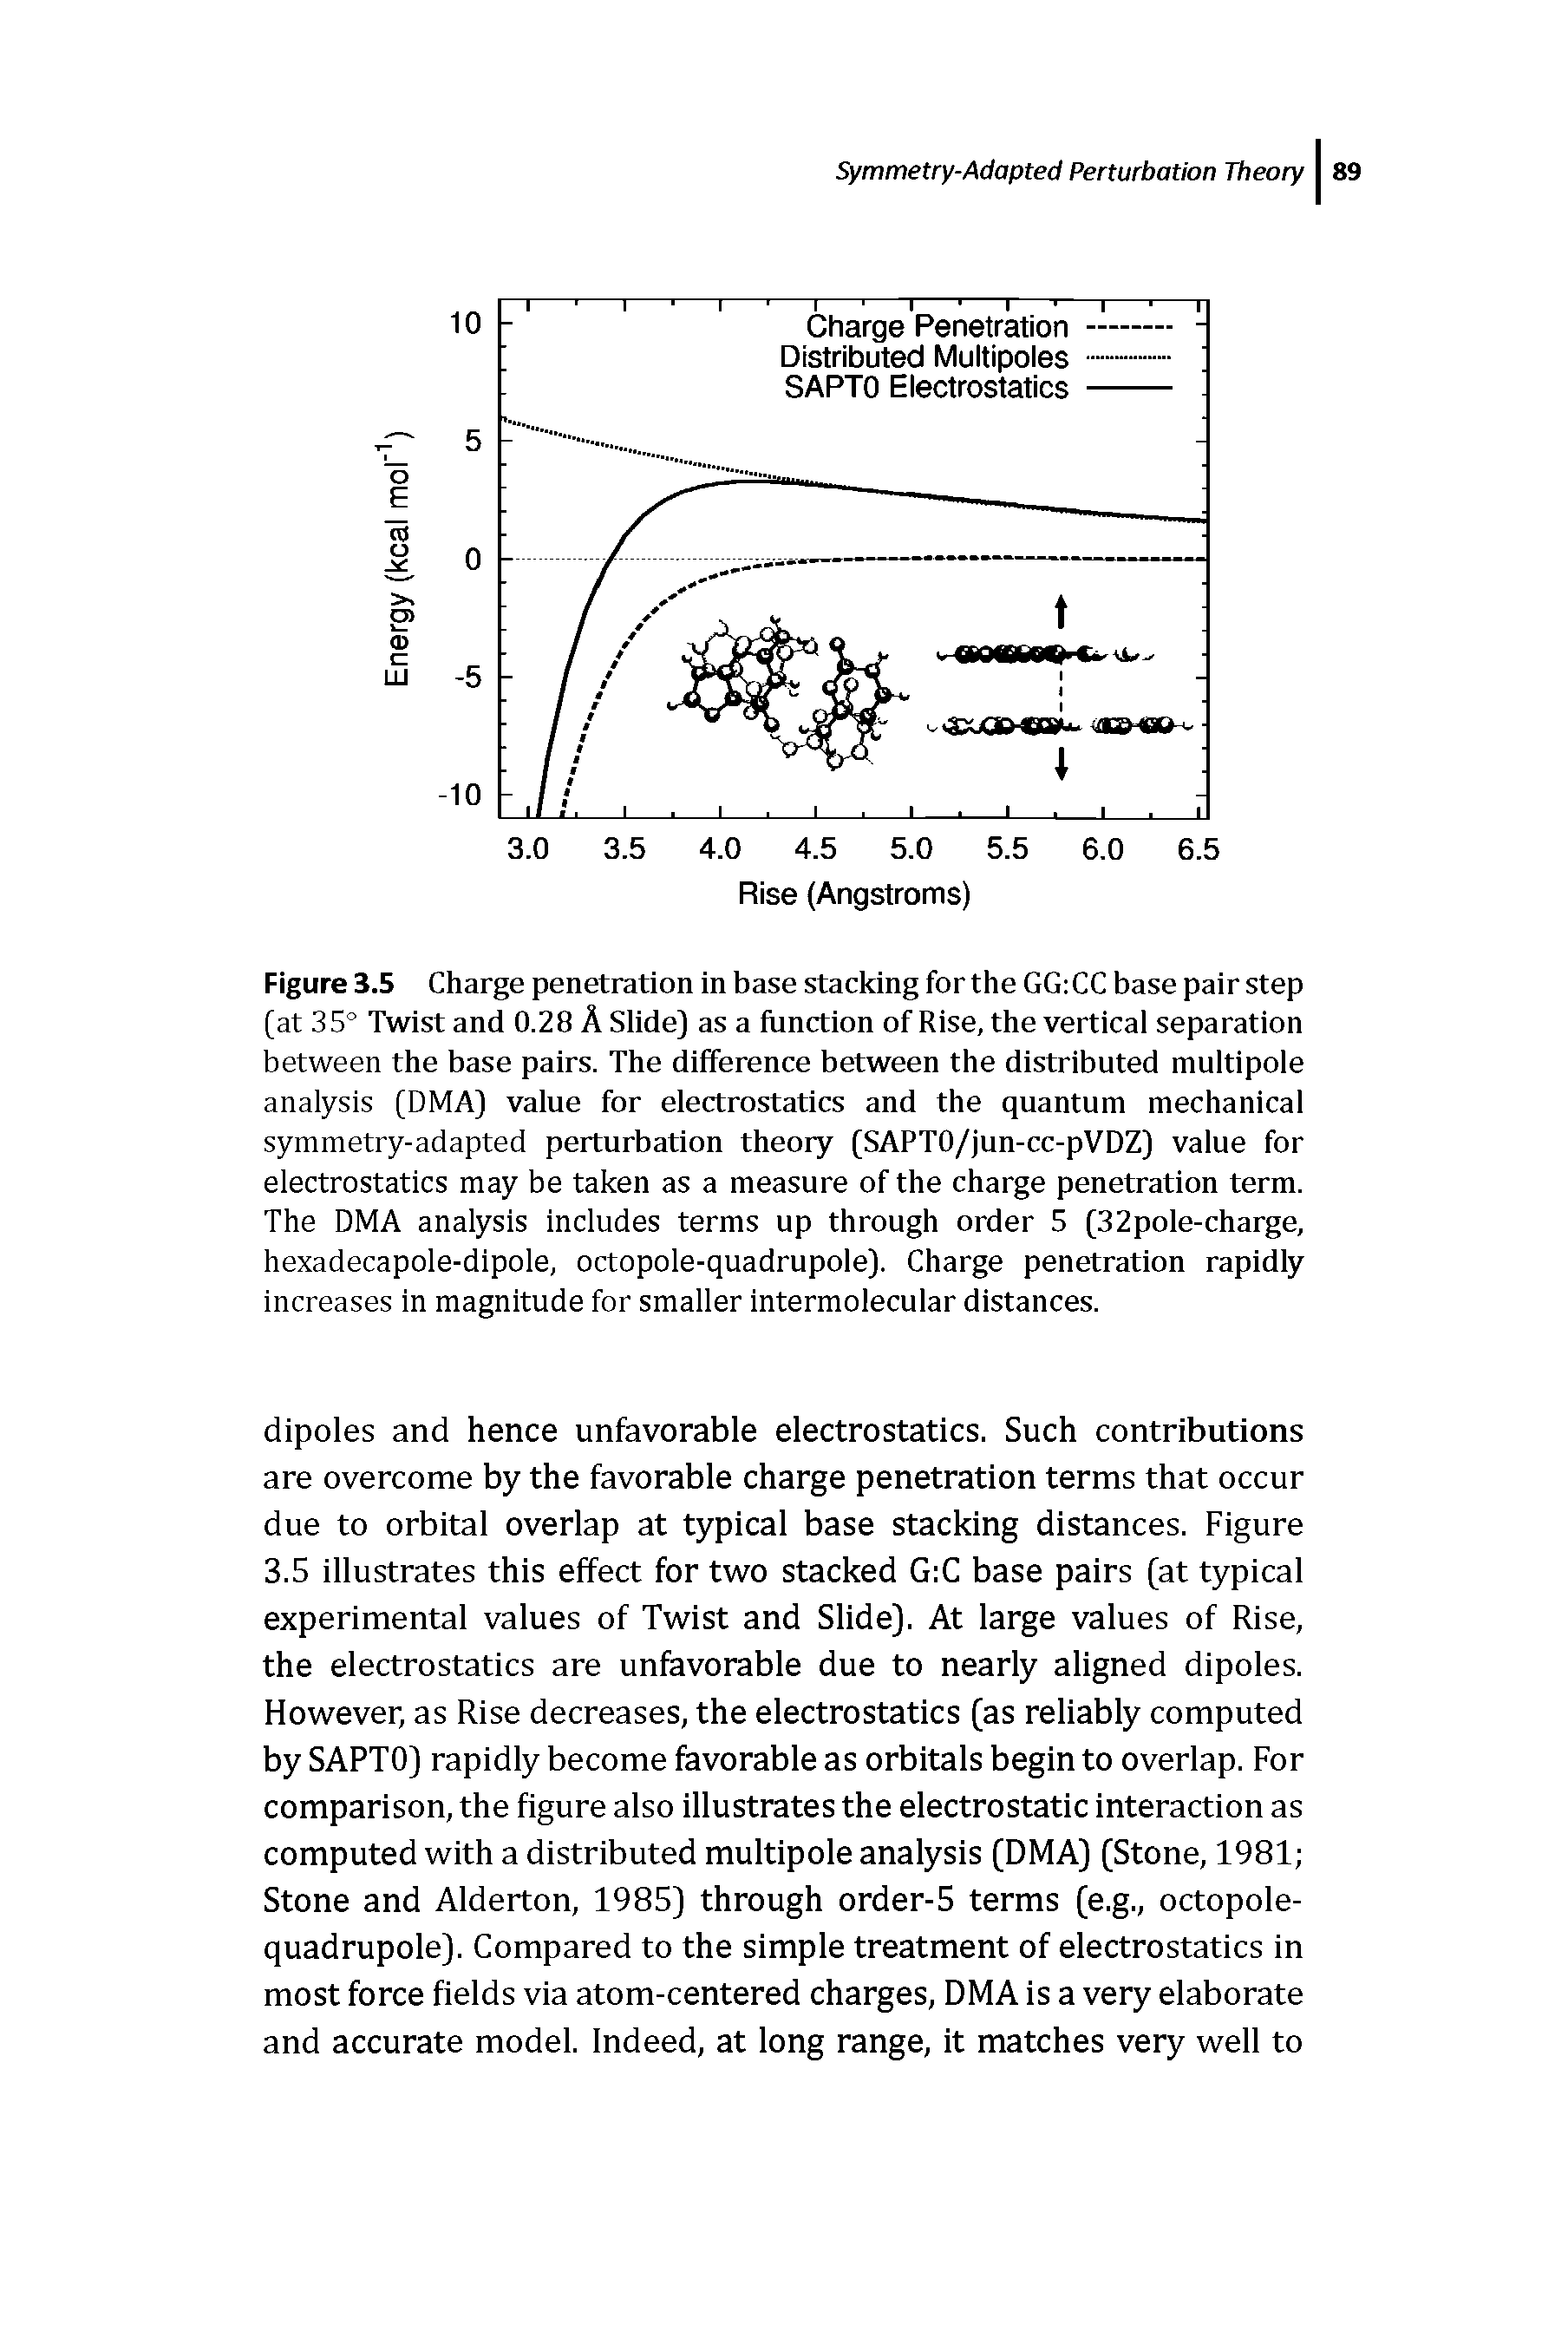 Figure 3.5 Charge penetration in base stacking for the GGiCC base pair step [at 35° Twist and 0.28 A Siide] as a function of Rise, the vertical separation between the base pairs. The difference between the distributed multipole analysis [DMA) value for electrostatics and the quantum mechanical symmetry-adapted perturbation theory [SAPTO/jun-cc-pVDZ) value for electrostatics may be taken as a measure of the charge penetration term. The DMA analysis includes terms up through order 5 [32pole-chai e, hexadecapole-dipole, octopole-quadrupole). Charge penetration rapidly increases in magnitude for smaller intermolecular distances.